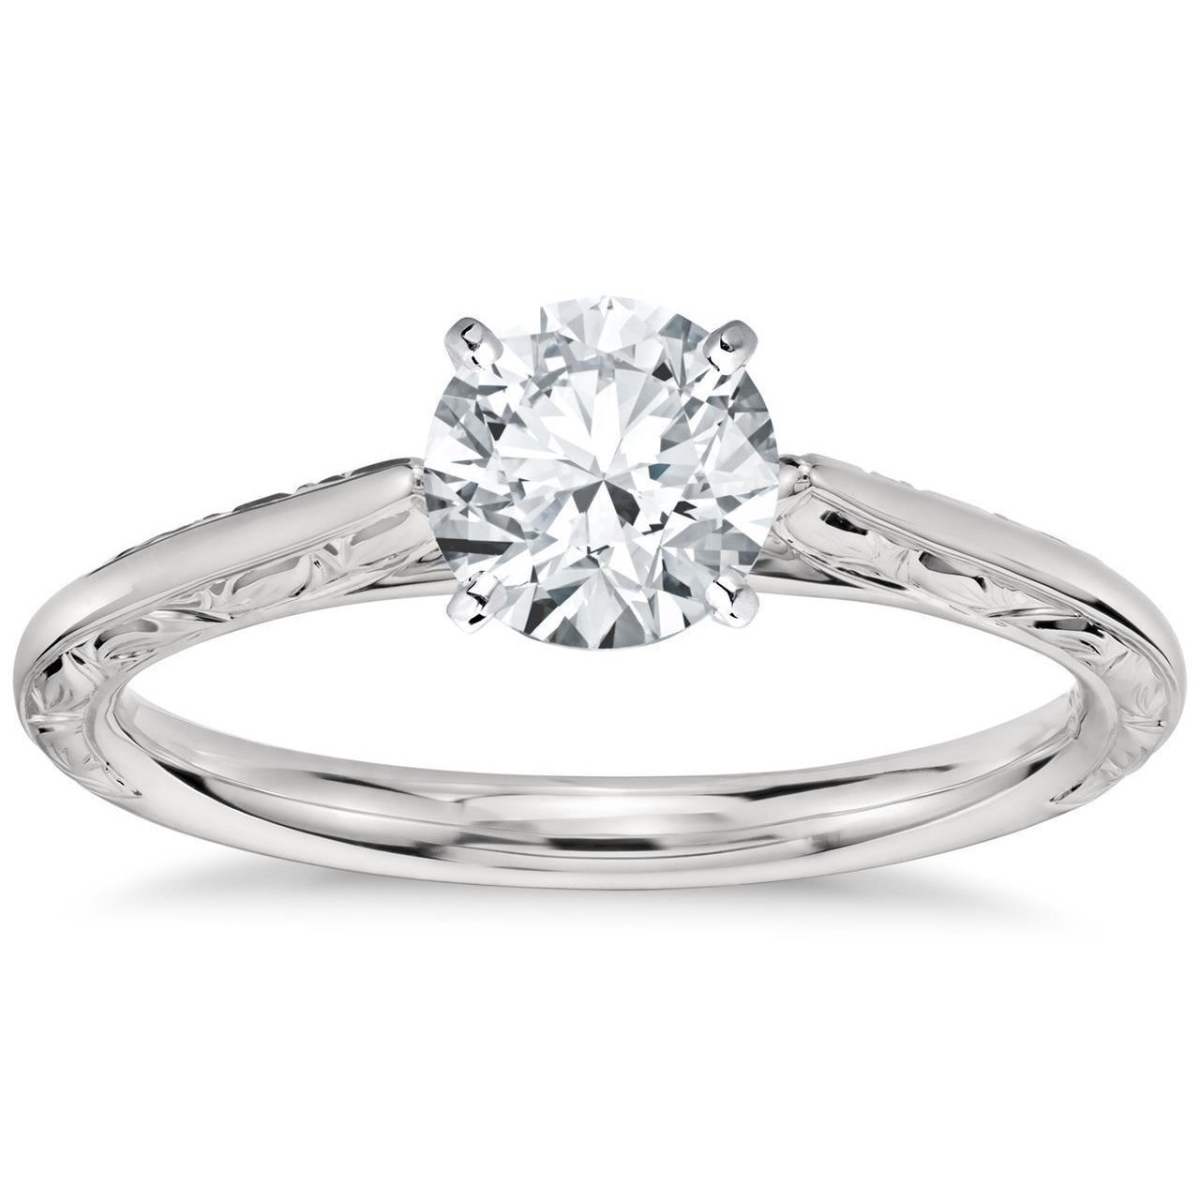 Picture of Harry Chad Enterprises 38904 1.50 CT Big Round Cut Solitaire Diamond Engagement Ring, Size 6.5